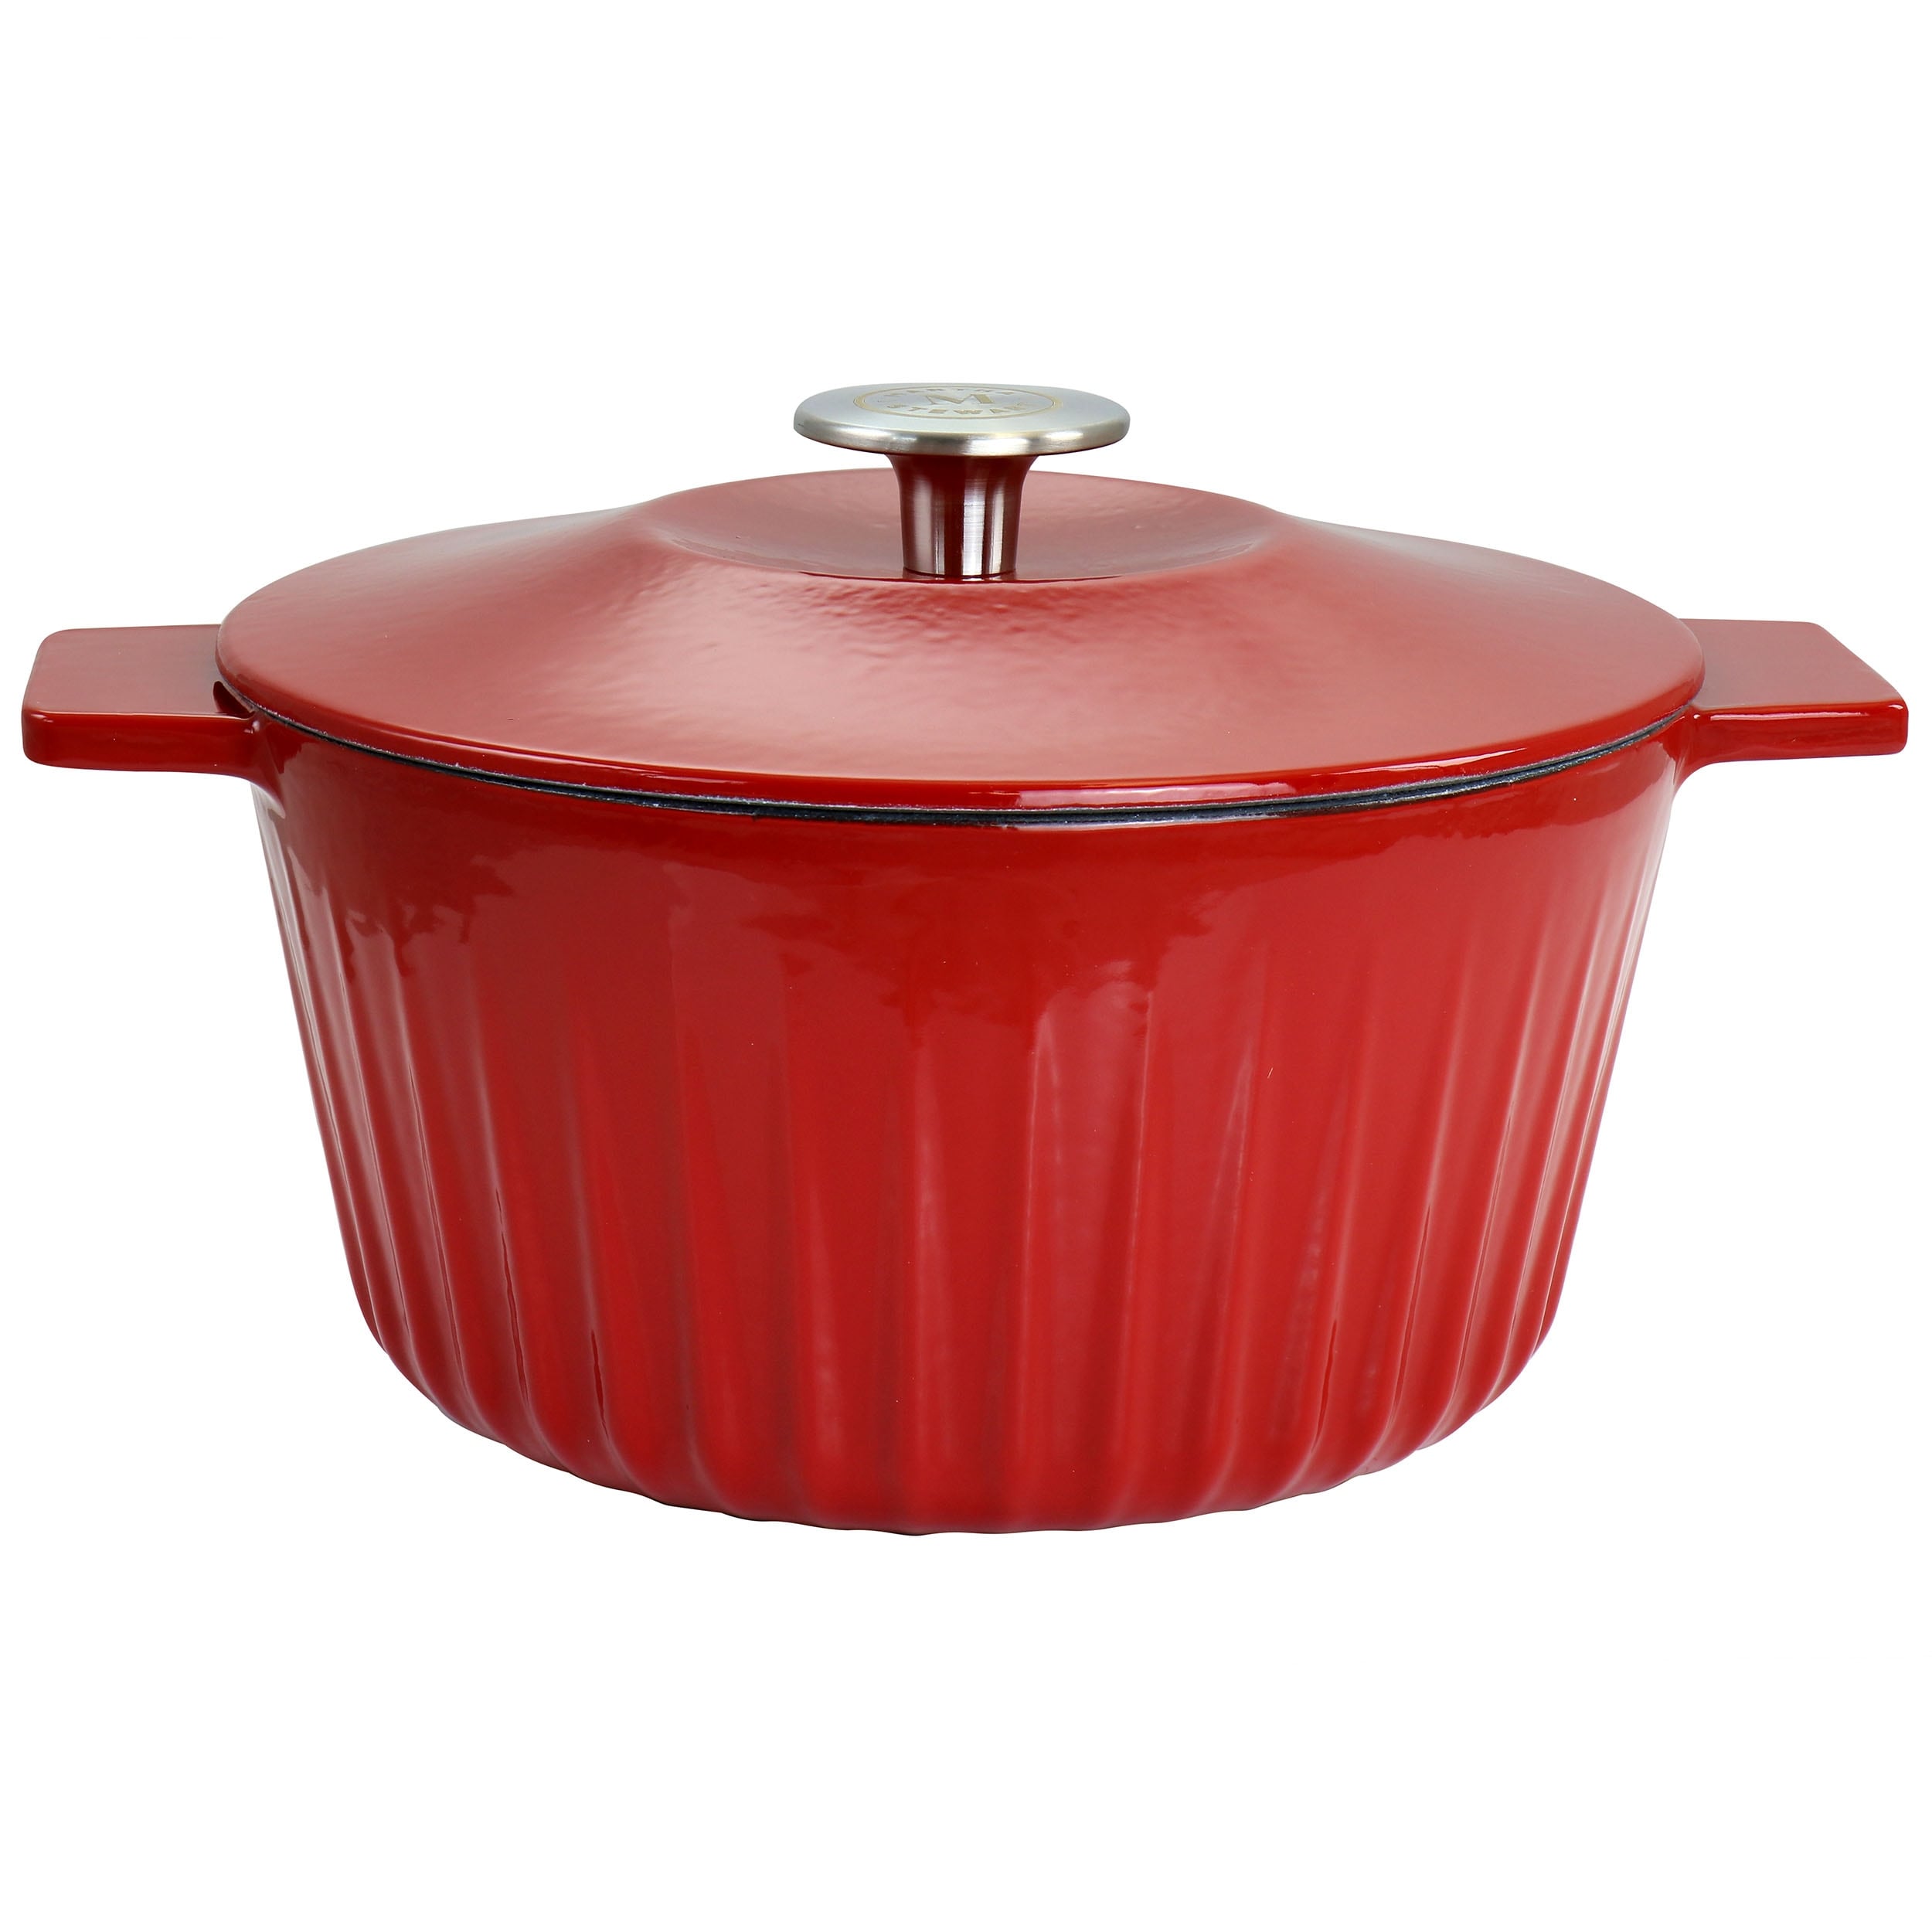 https://ak1.ostkcdn.com/images/products/is/images/direct/a6505349f6d346be2ad4d01a4a488557fccf49ef/Martha-Stewart-Enameled-Cast-Iron-3Qt-Embossed-Stripe-Dutch-Oven-Red.jpg